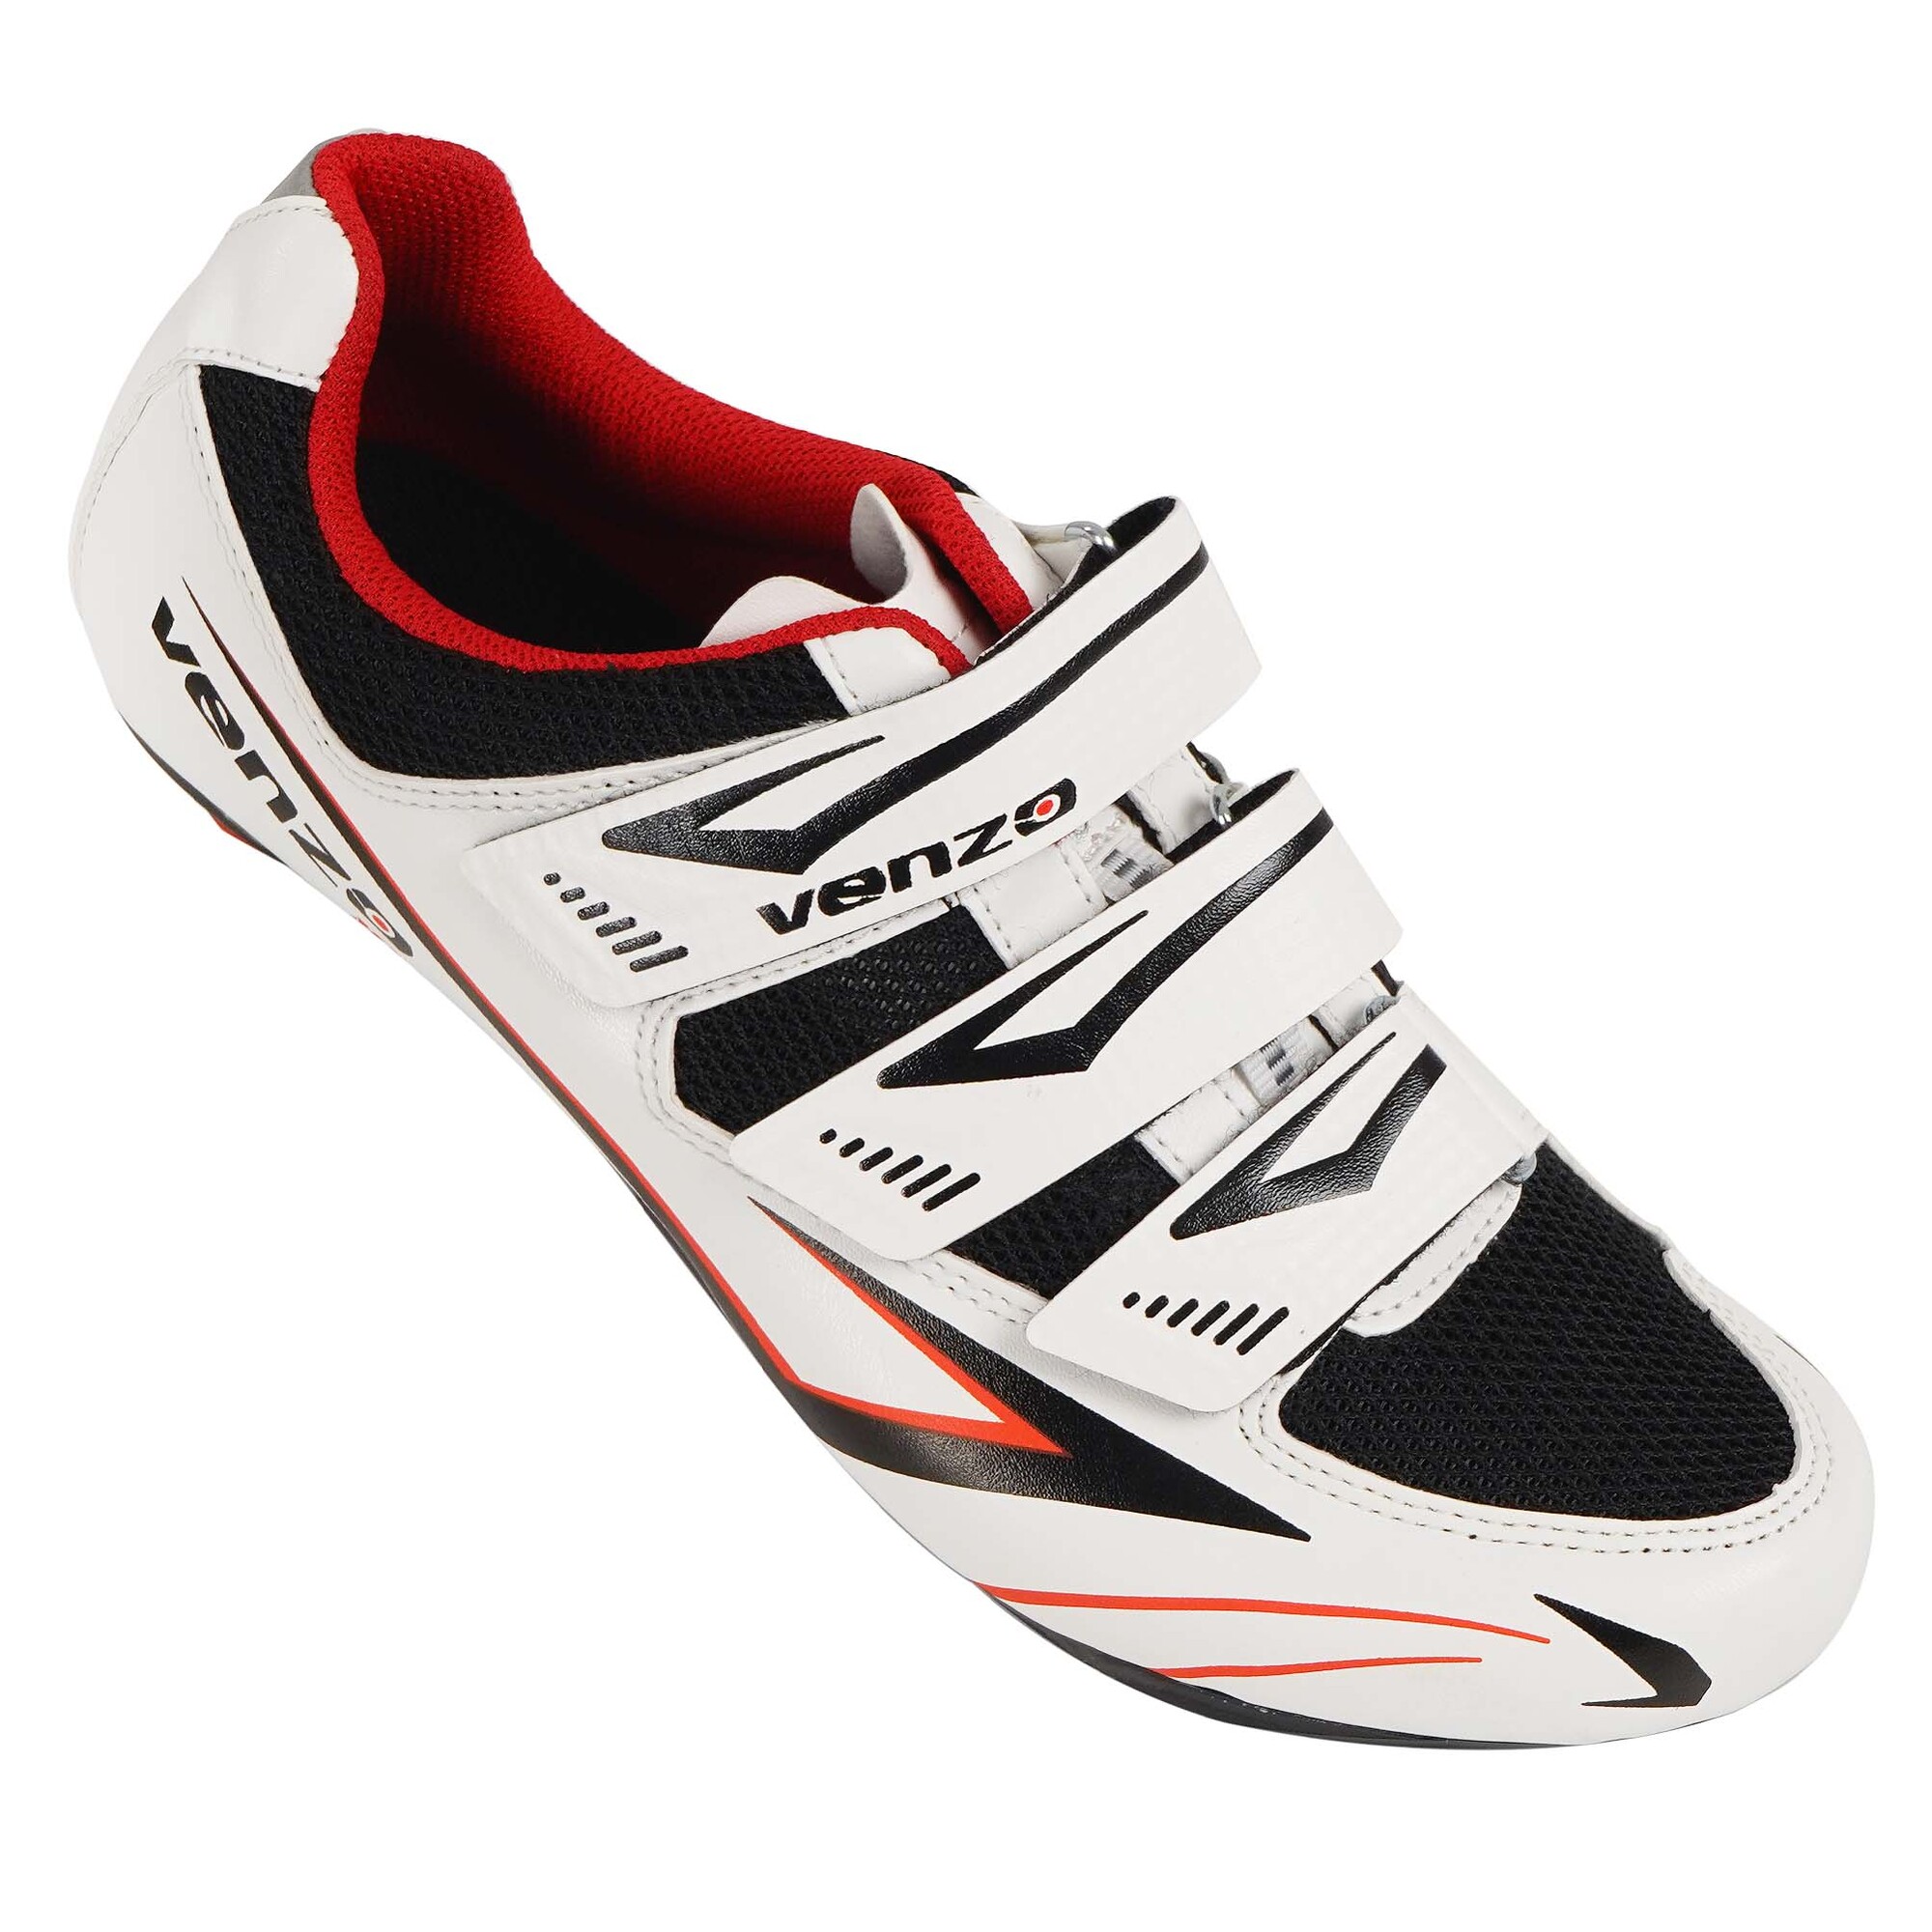 Venzo Road Bike For Shimano SPD SL Look Cycling Bicycle Shoes 42.5